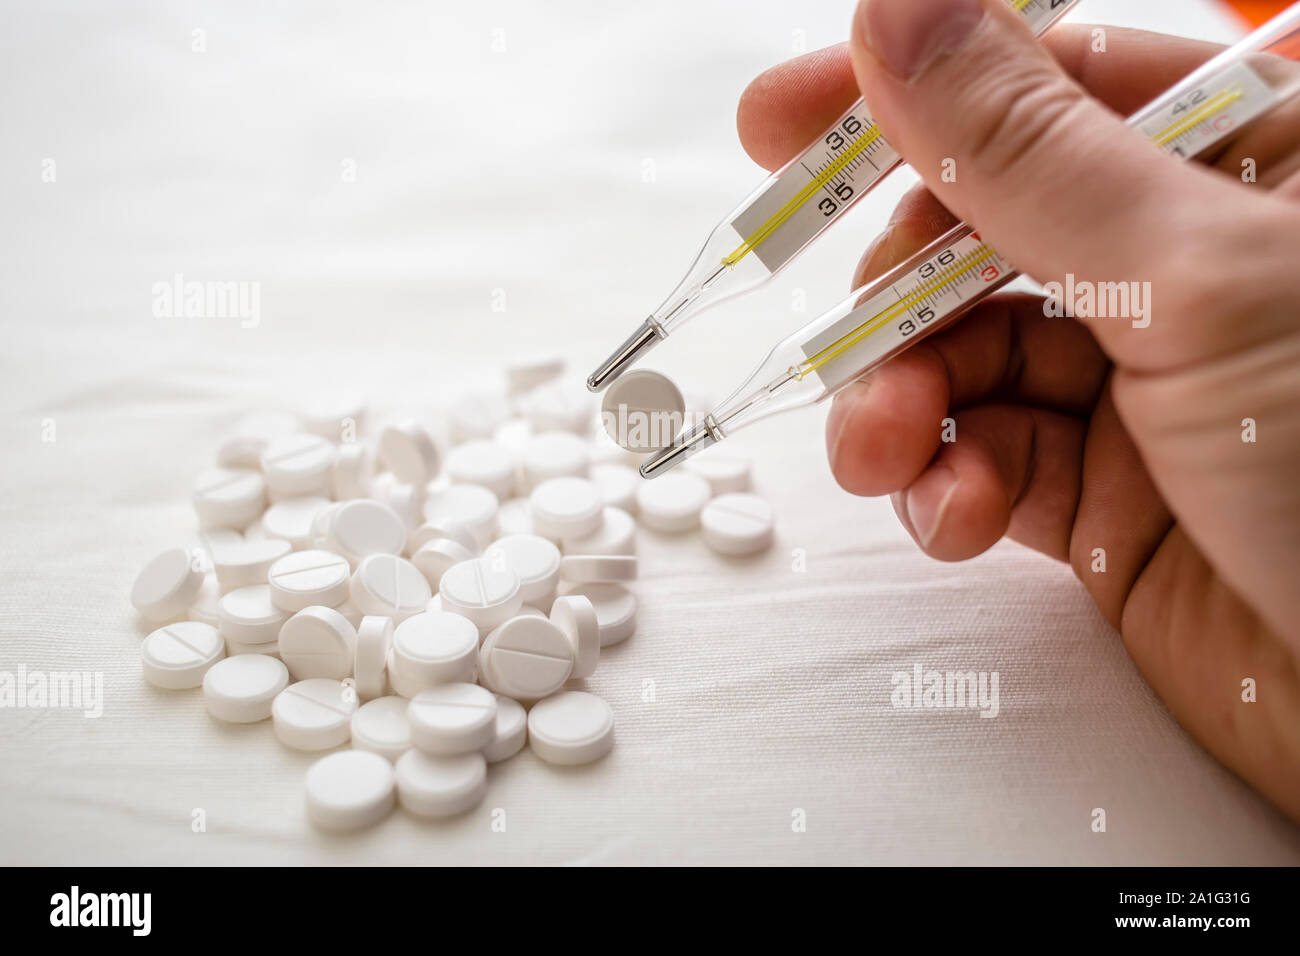 man is going to eat the drug tablets and holds two medical thermometer like chopsticks Stock Photo